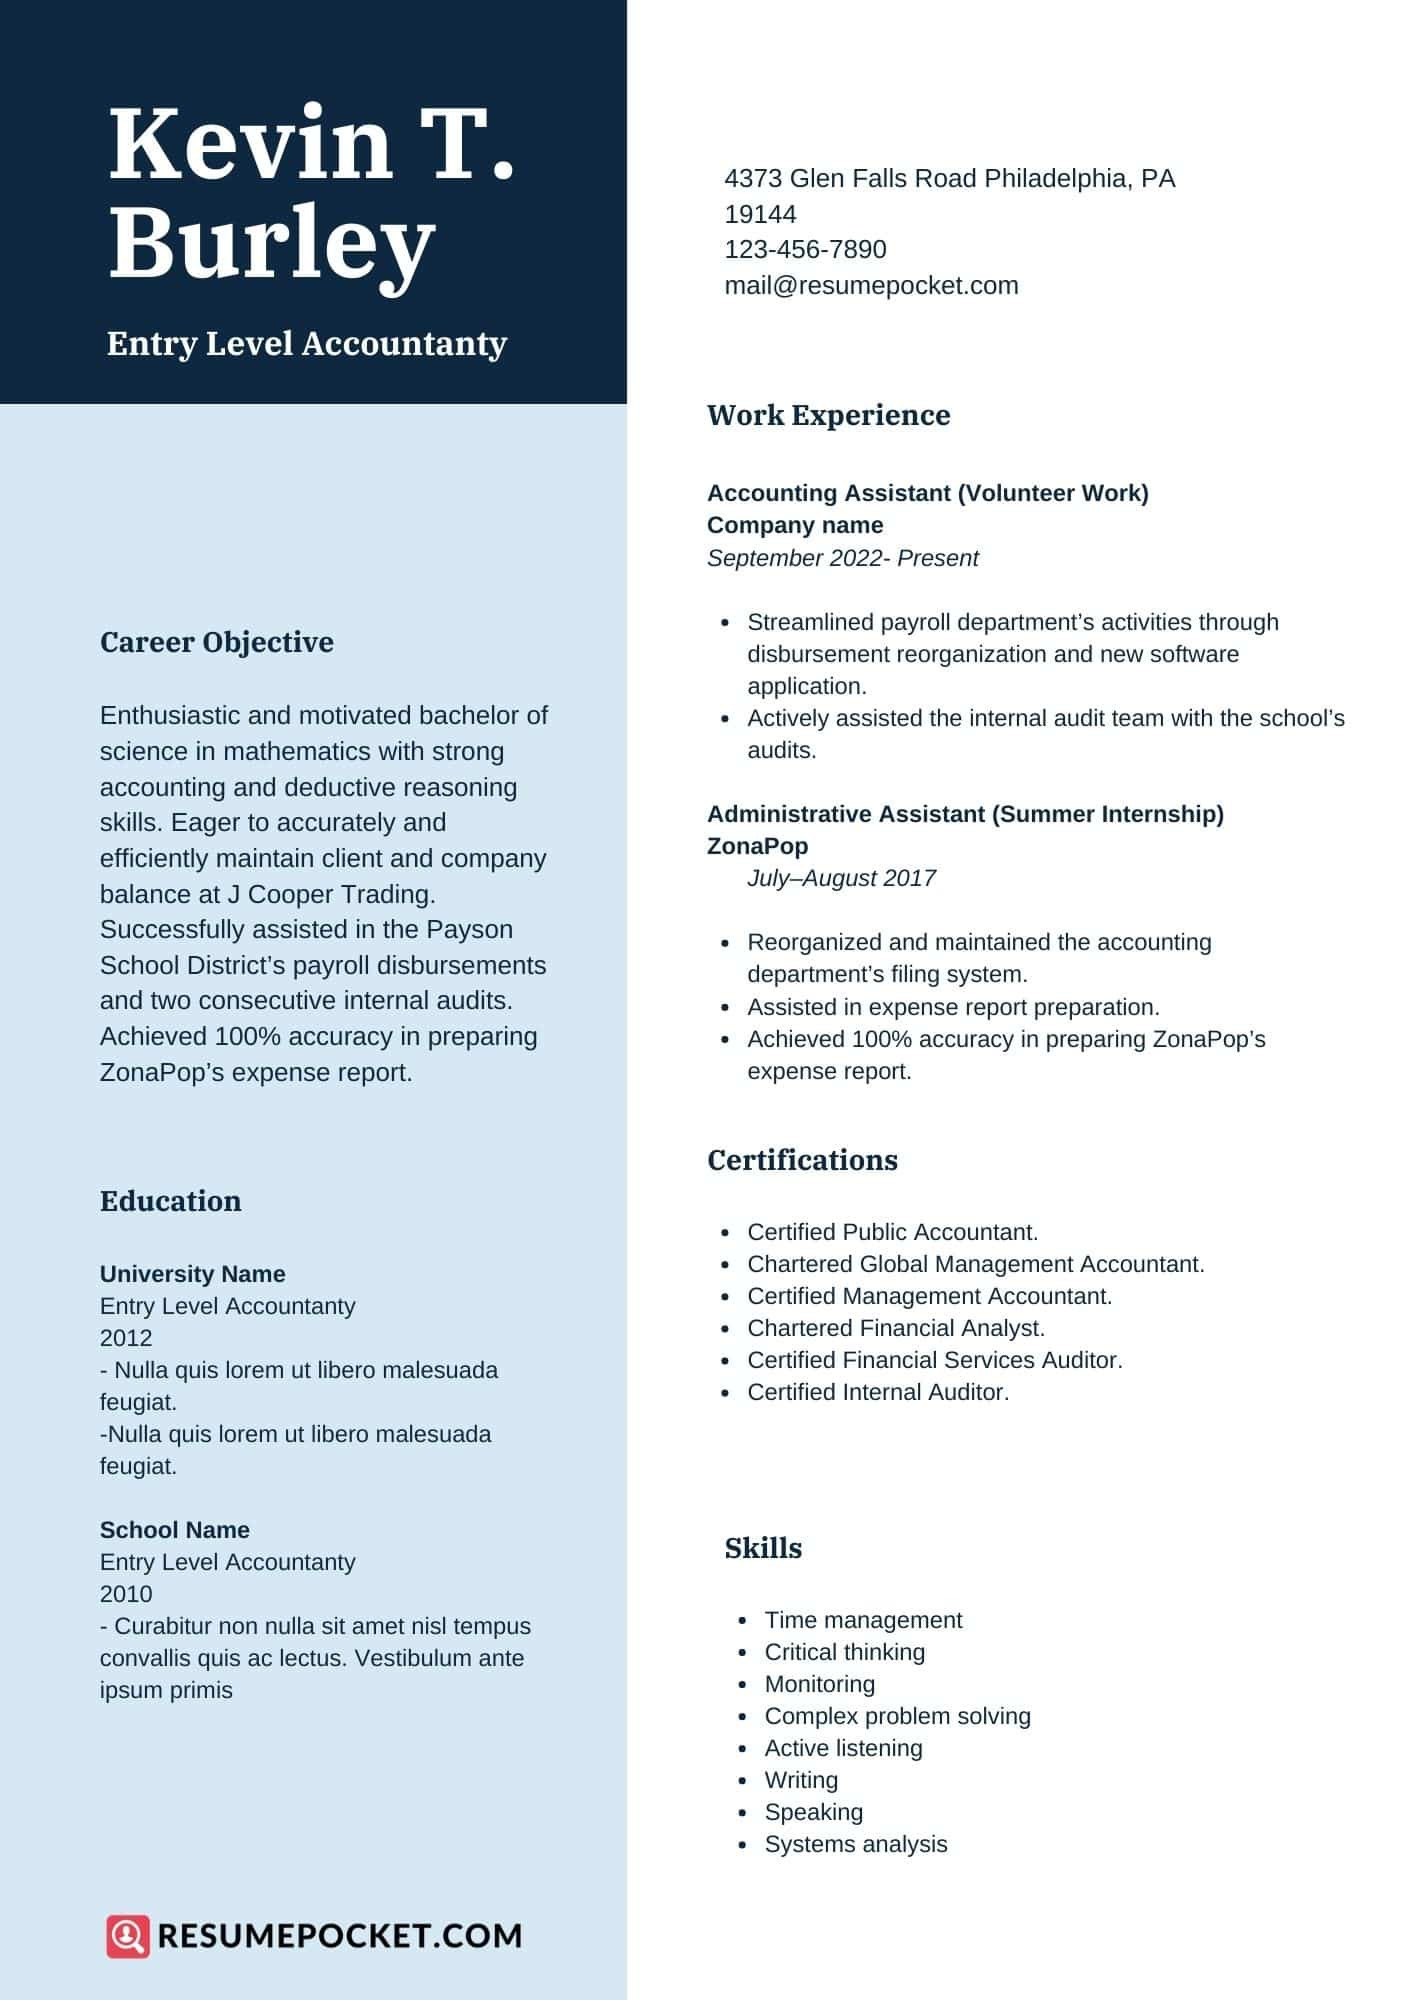 Resume Sample for Accountant with No Experience Entry Level Accountant Resume Samples – Resumepocket